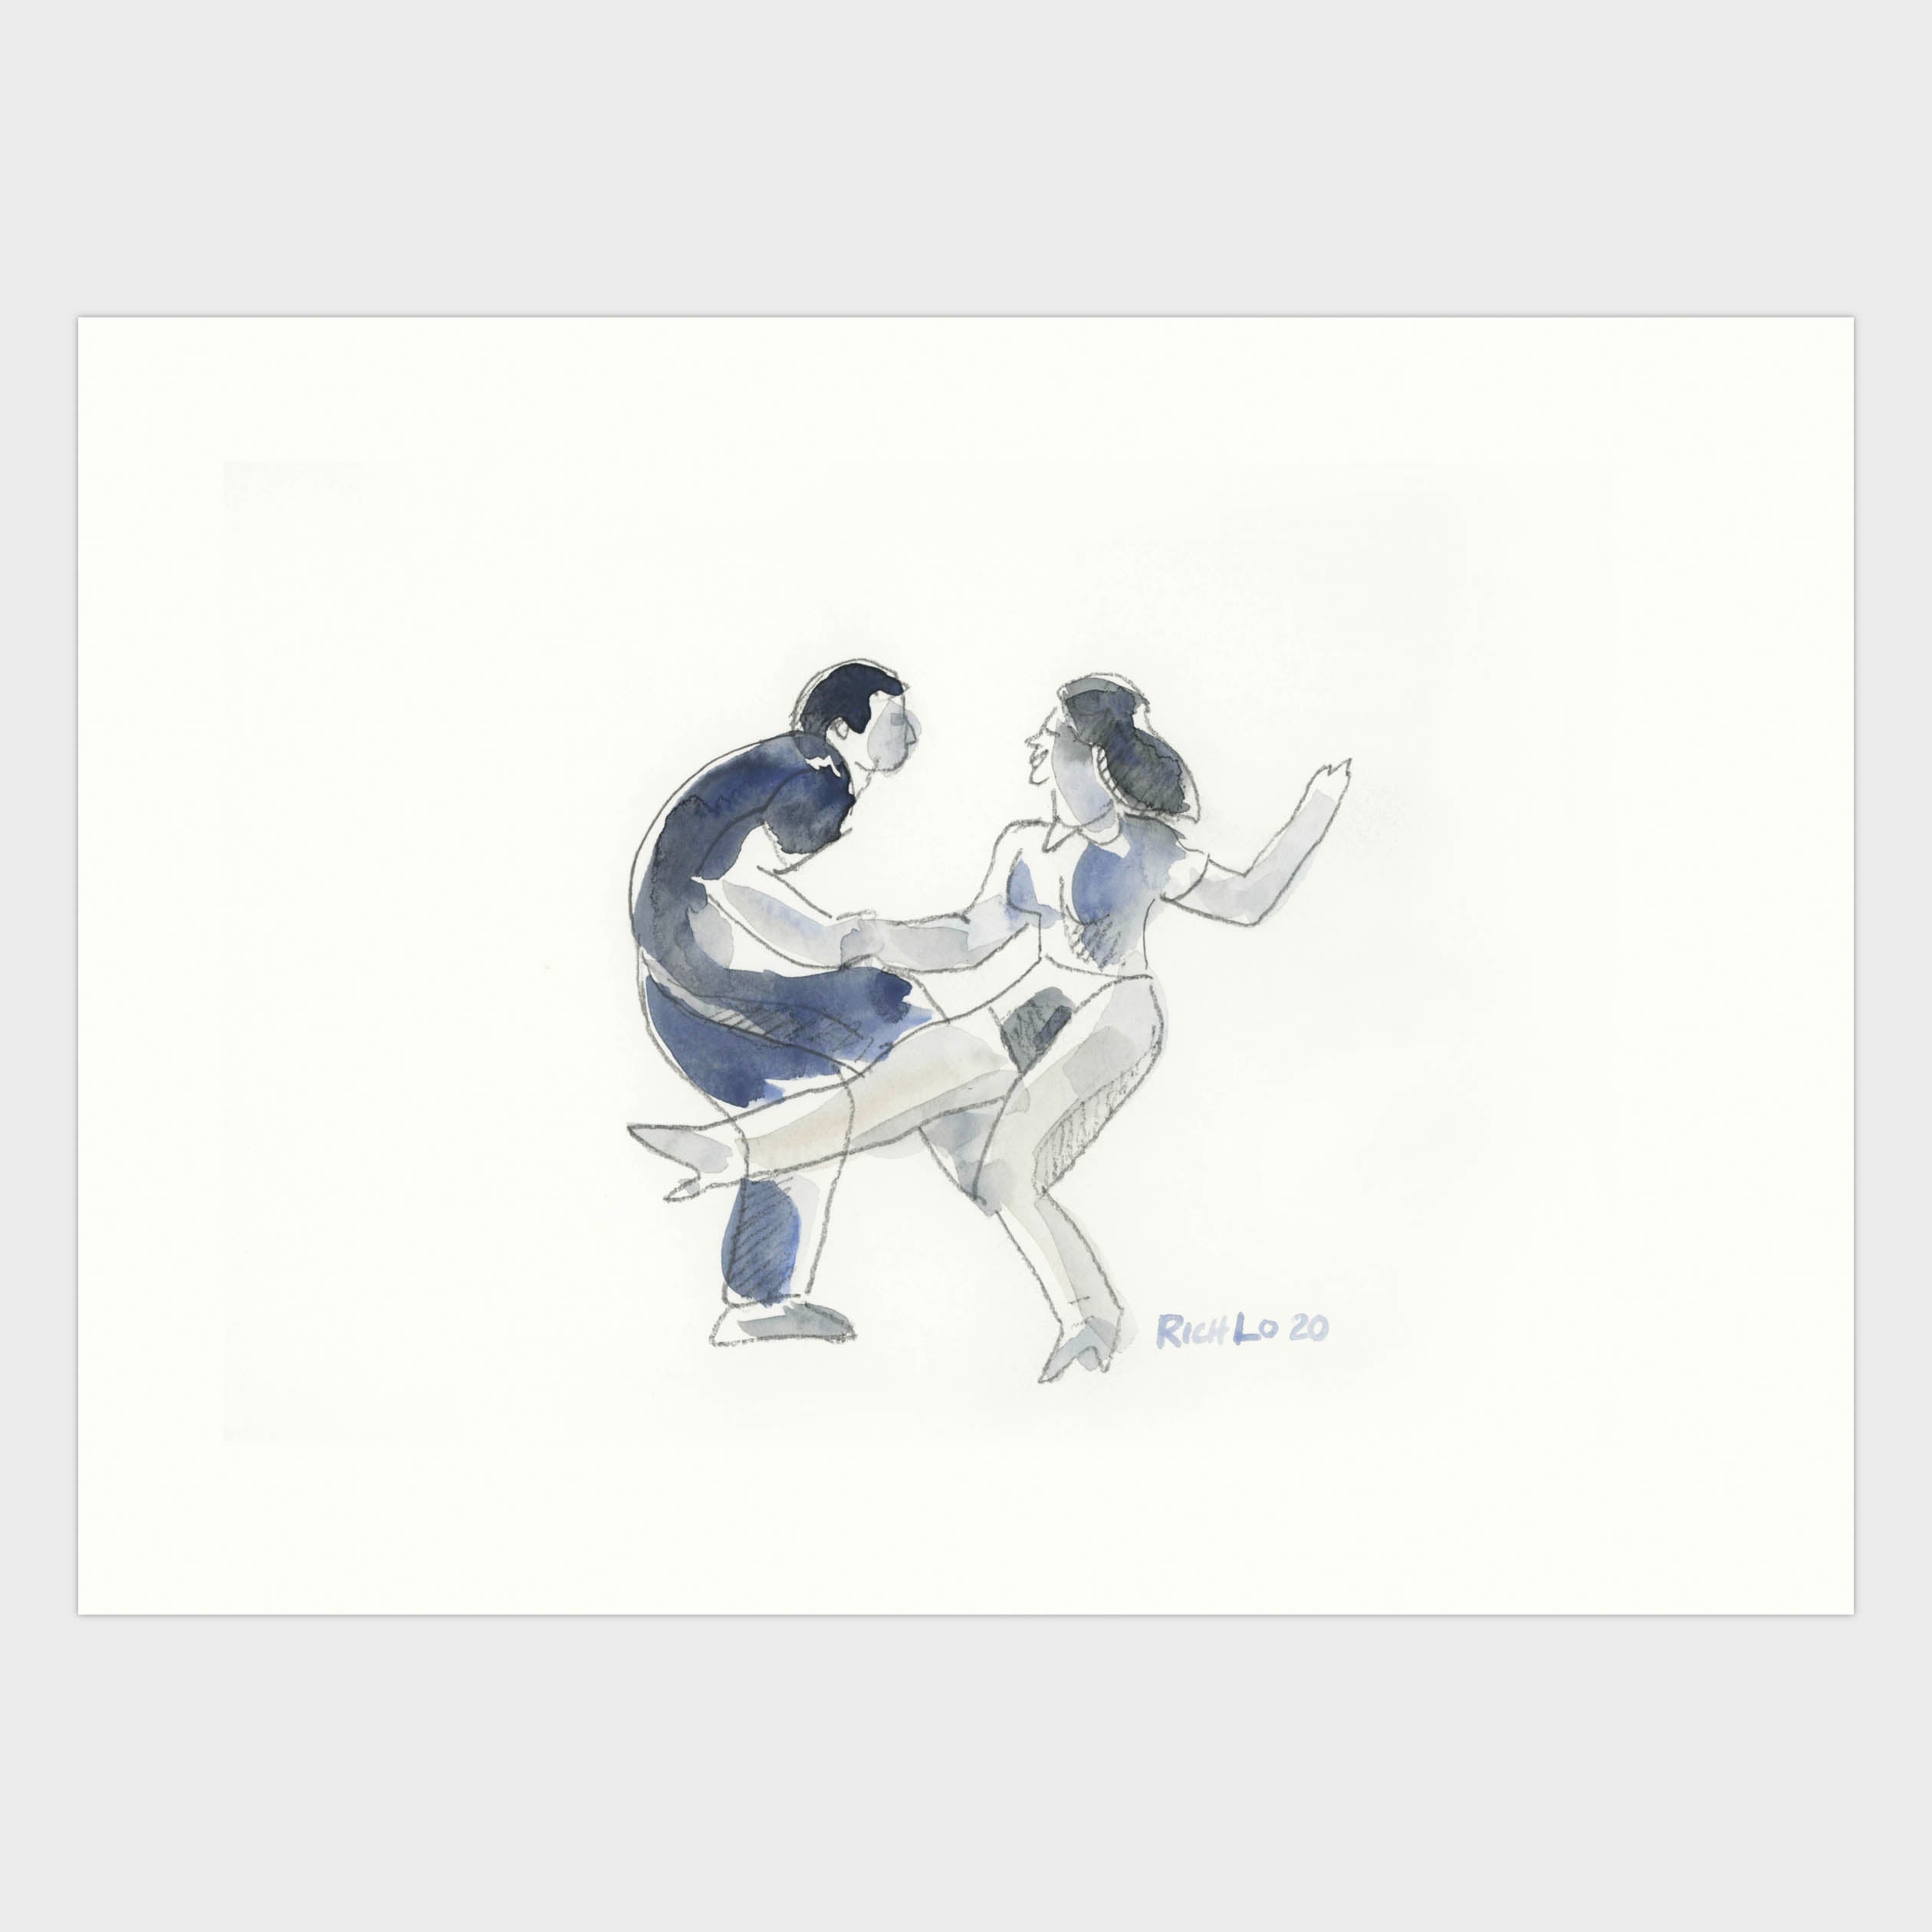 Original art. Playful line and washes of a couple dancing create a spirited composition.